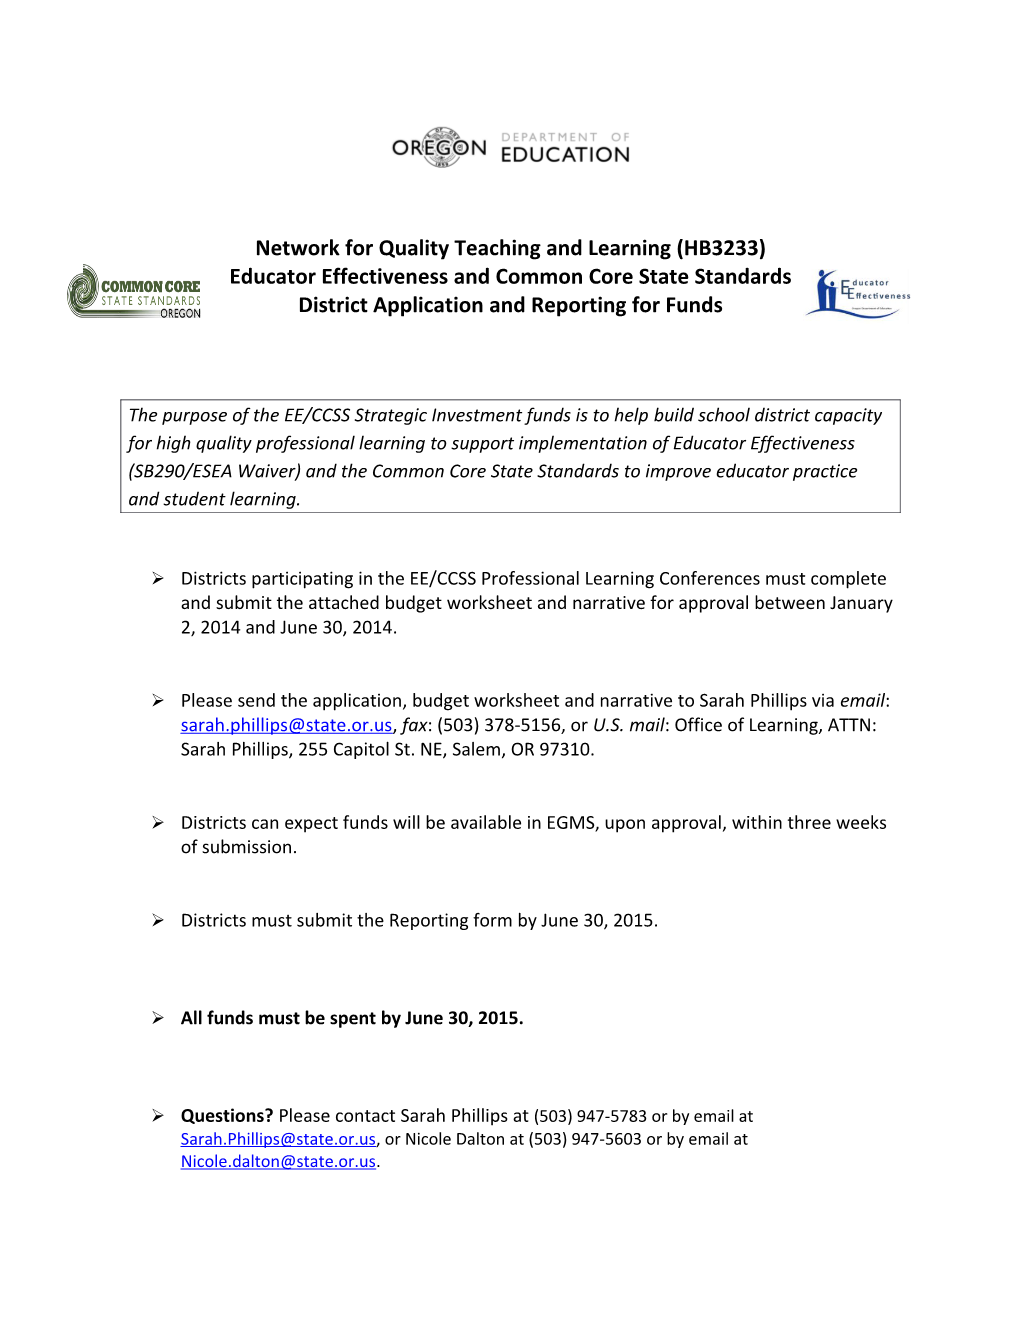 Network for Quality Teaching and Learning (HB3233)